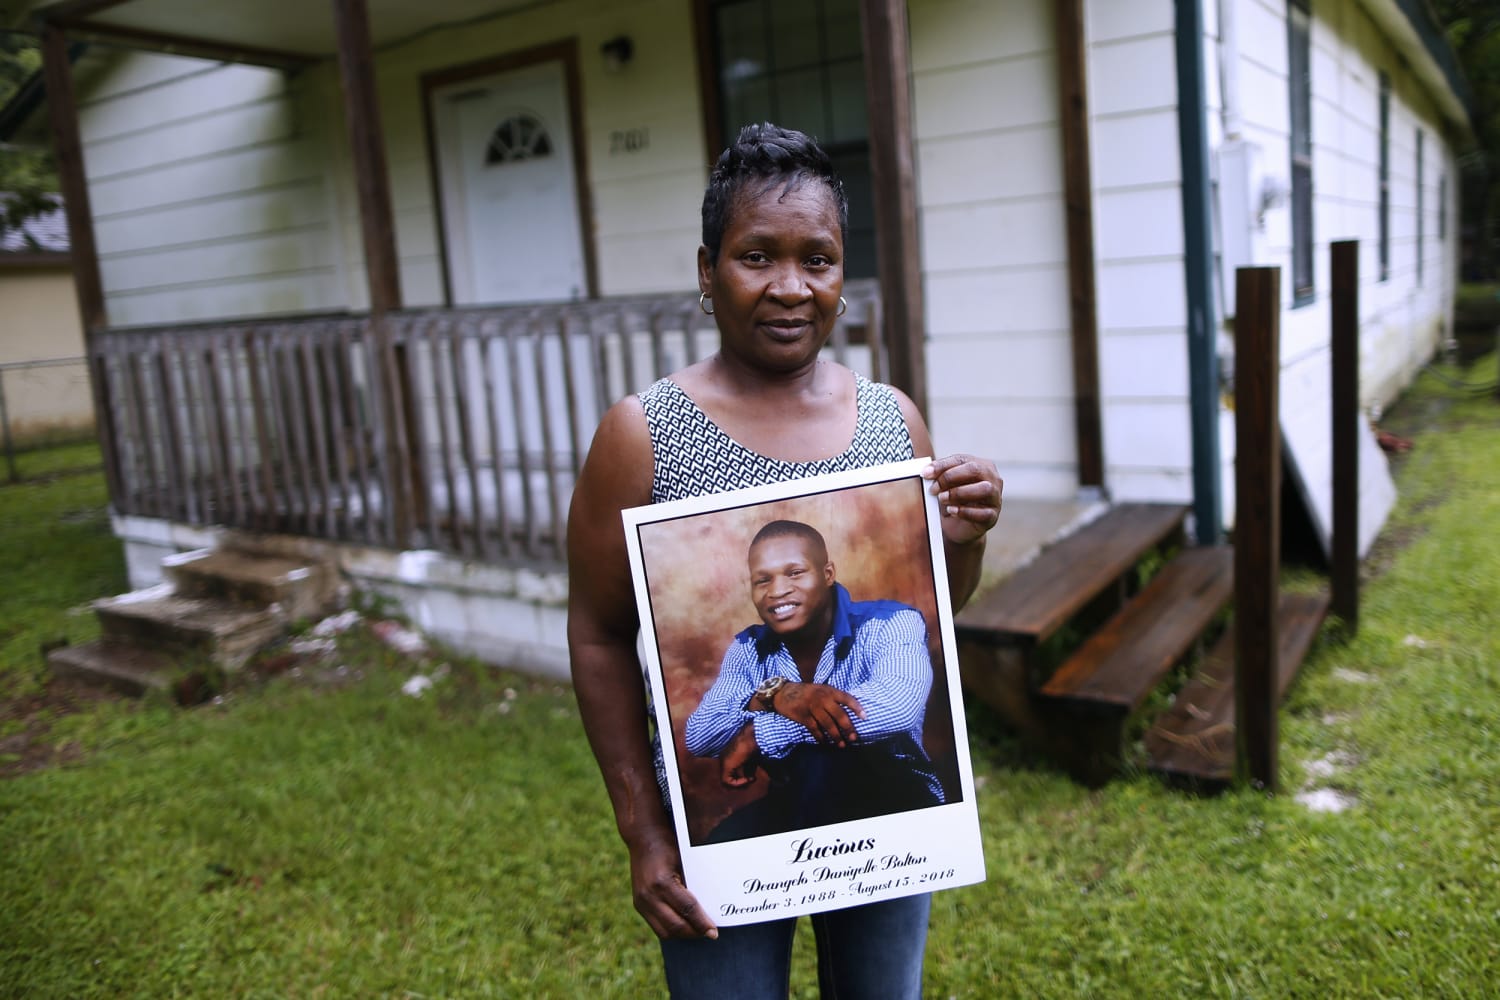 16 prisoners died in one month in mississippi. their families want